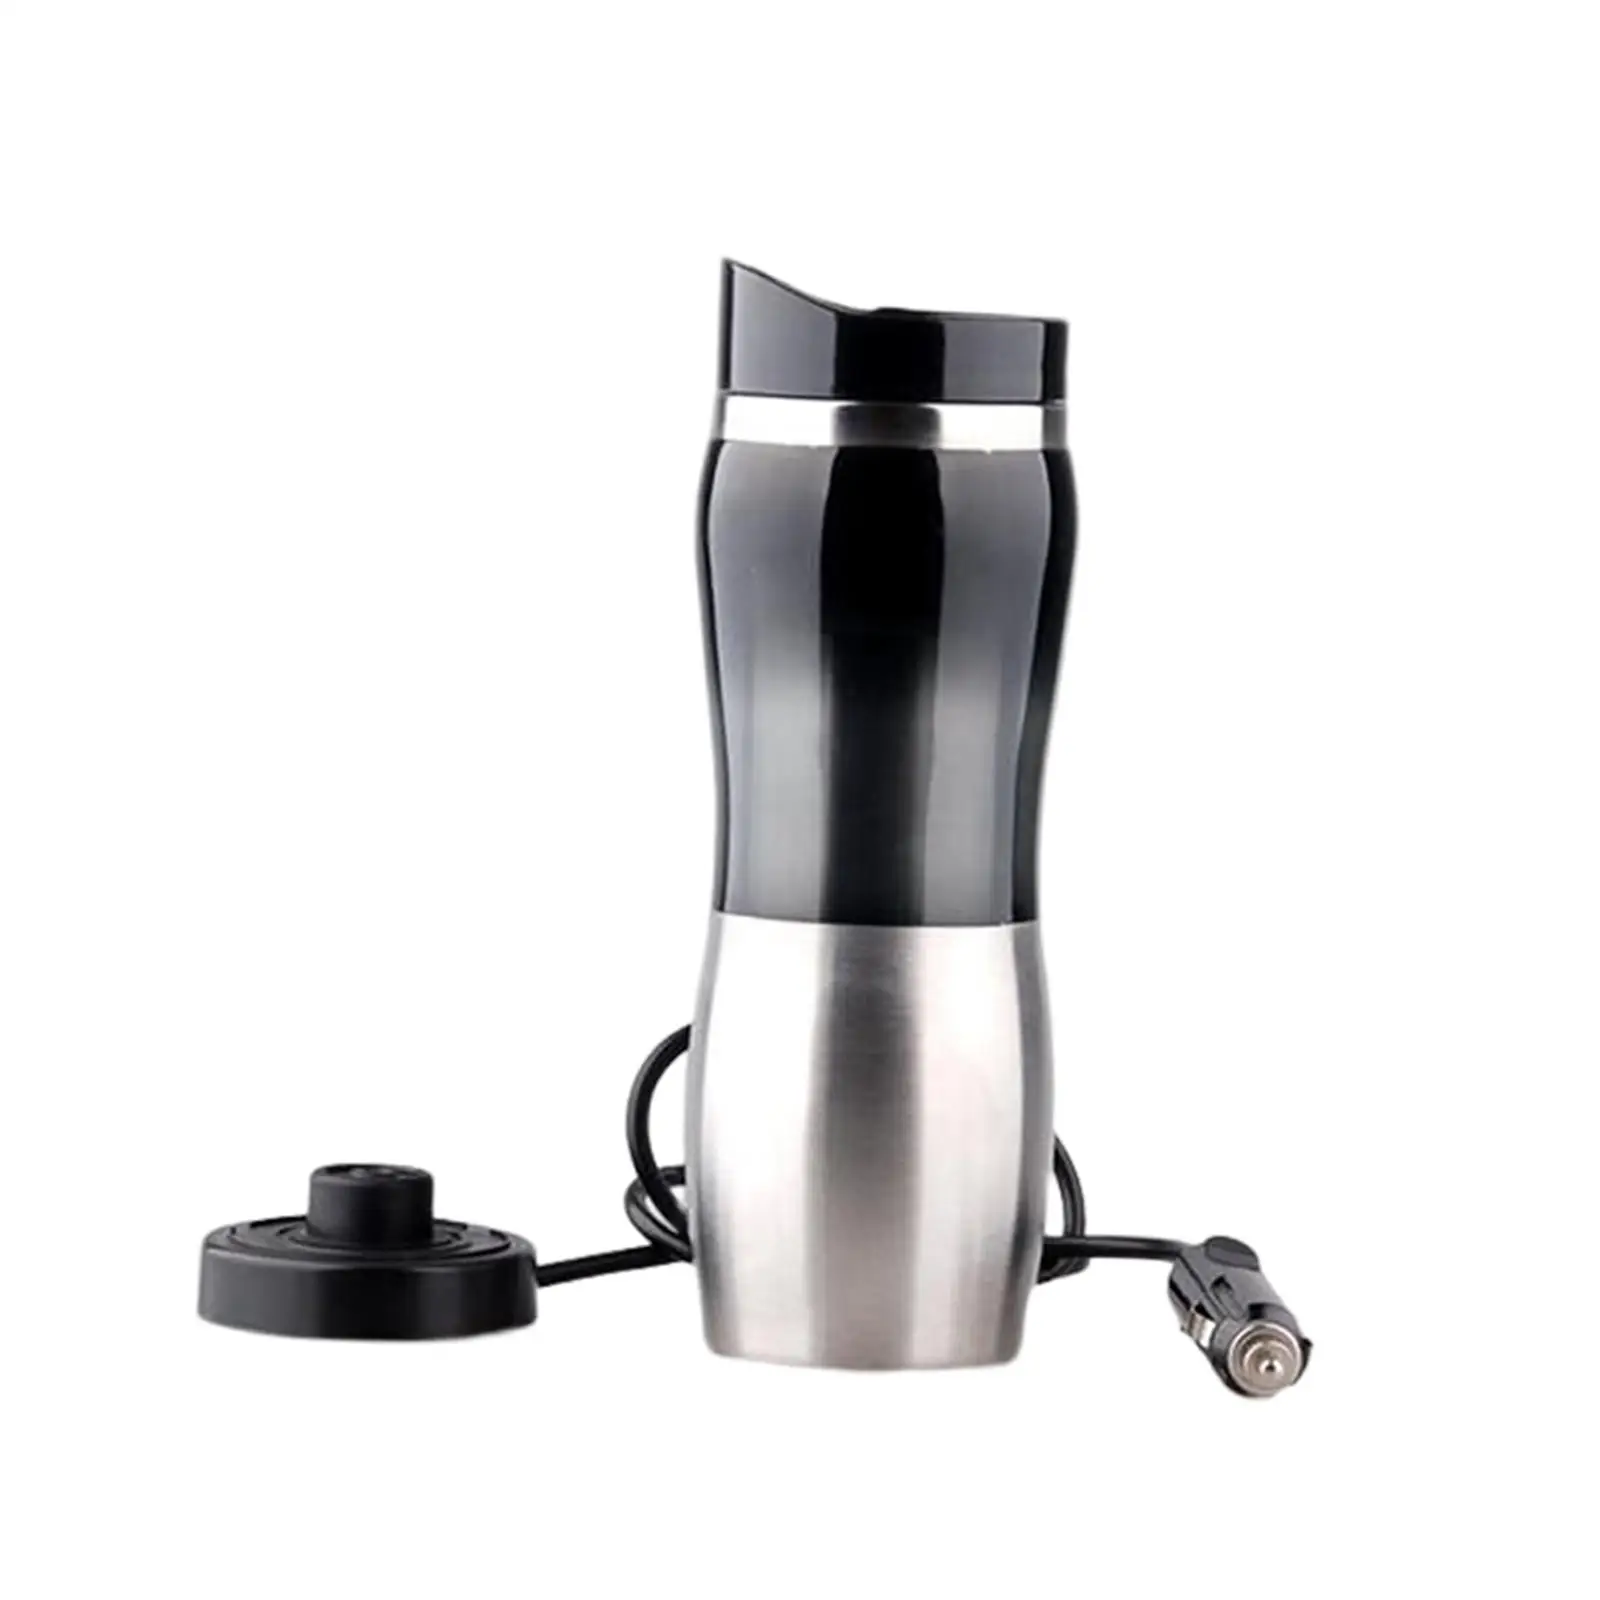 Car Electric Kettle 400ml 12V Stainless Steel Portable in Car Auto Heating Bottle Mug for Tea Travel Camping Boat Hot Water Eggs